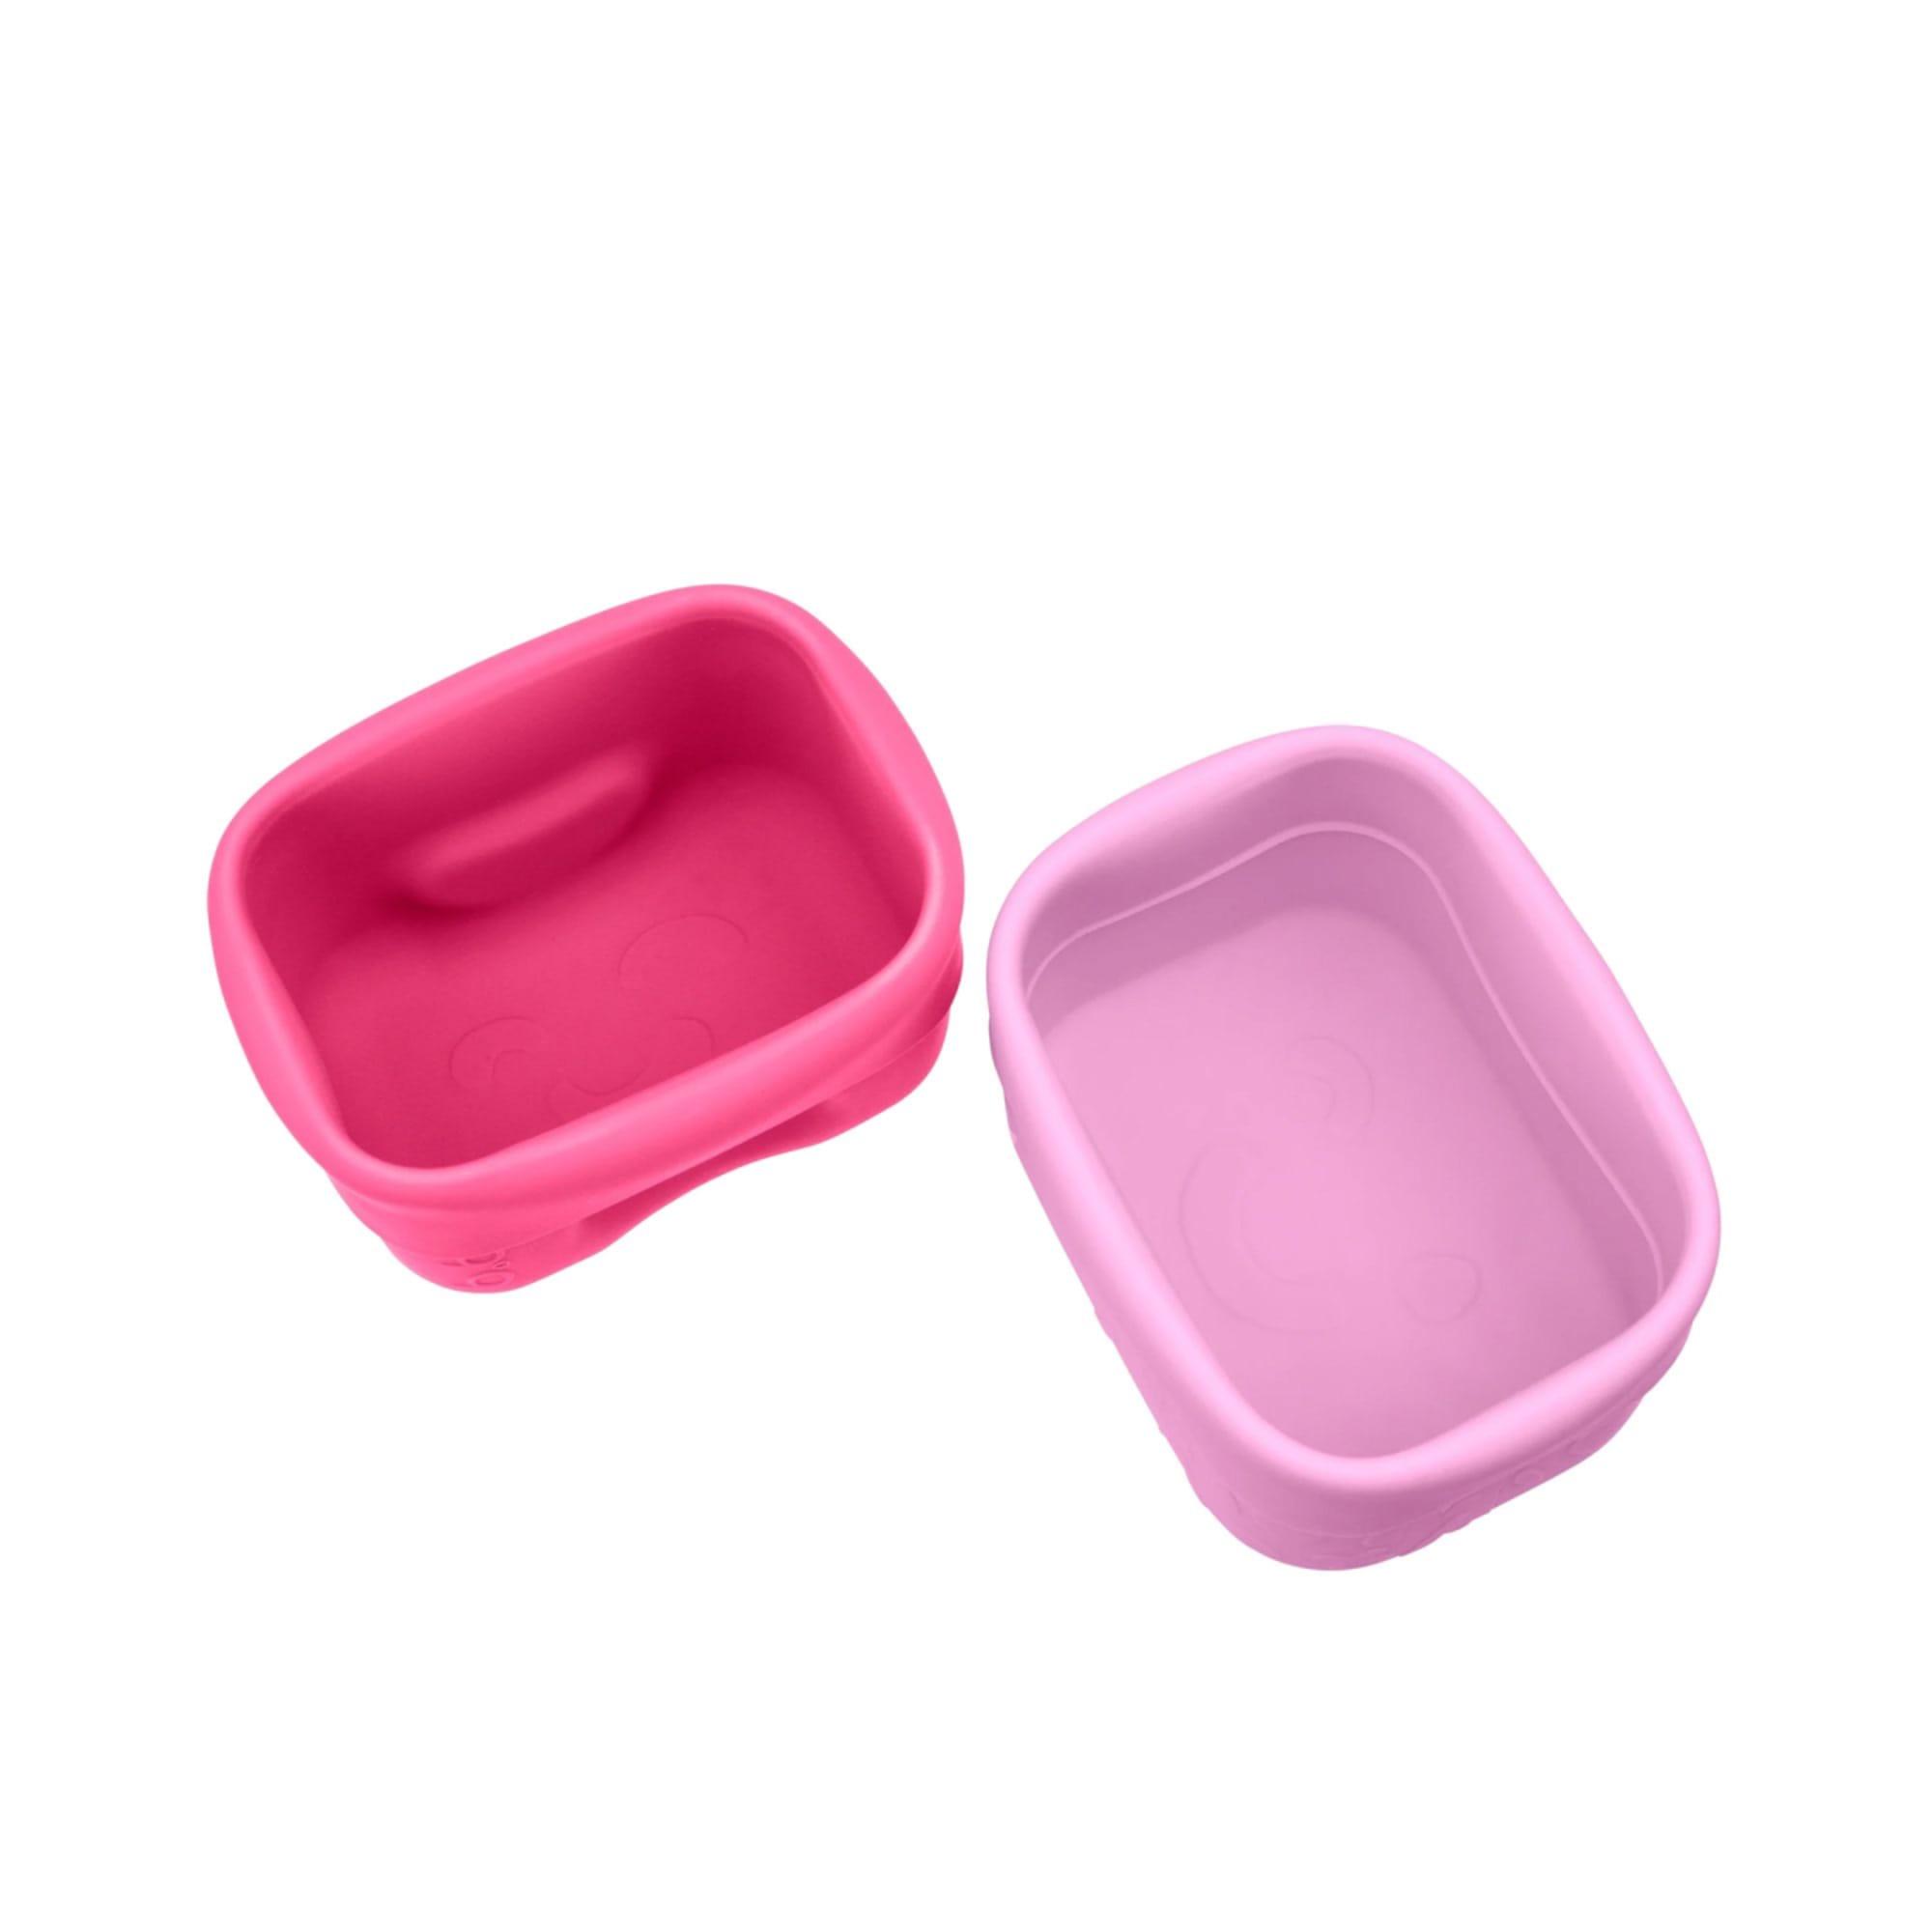 b.box Silicone Snack Cup Set of 2 Berry Image 5